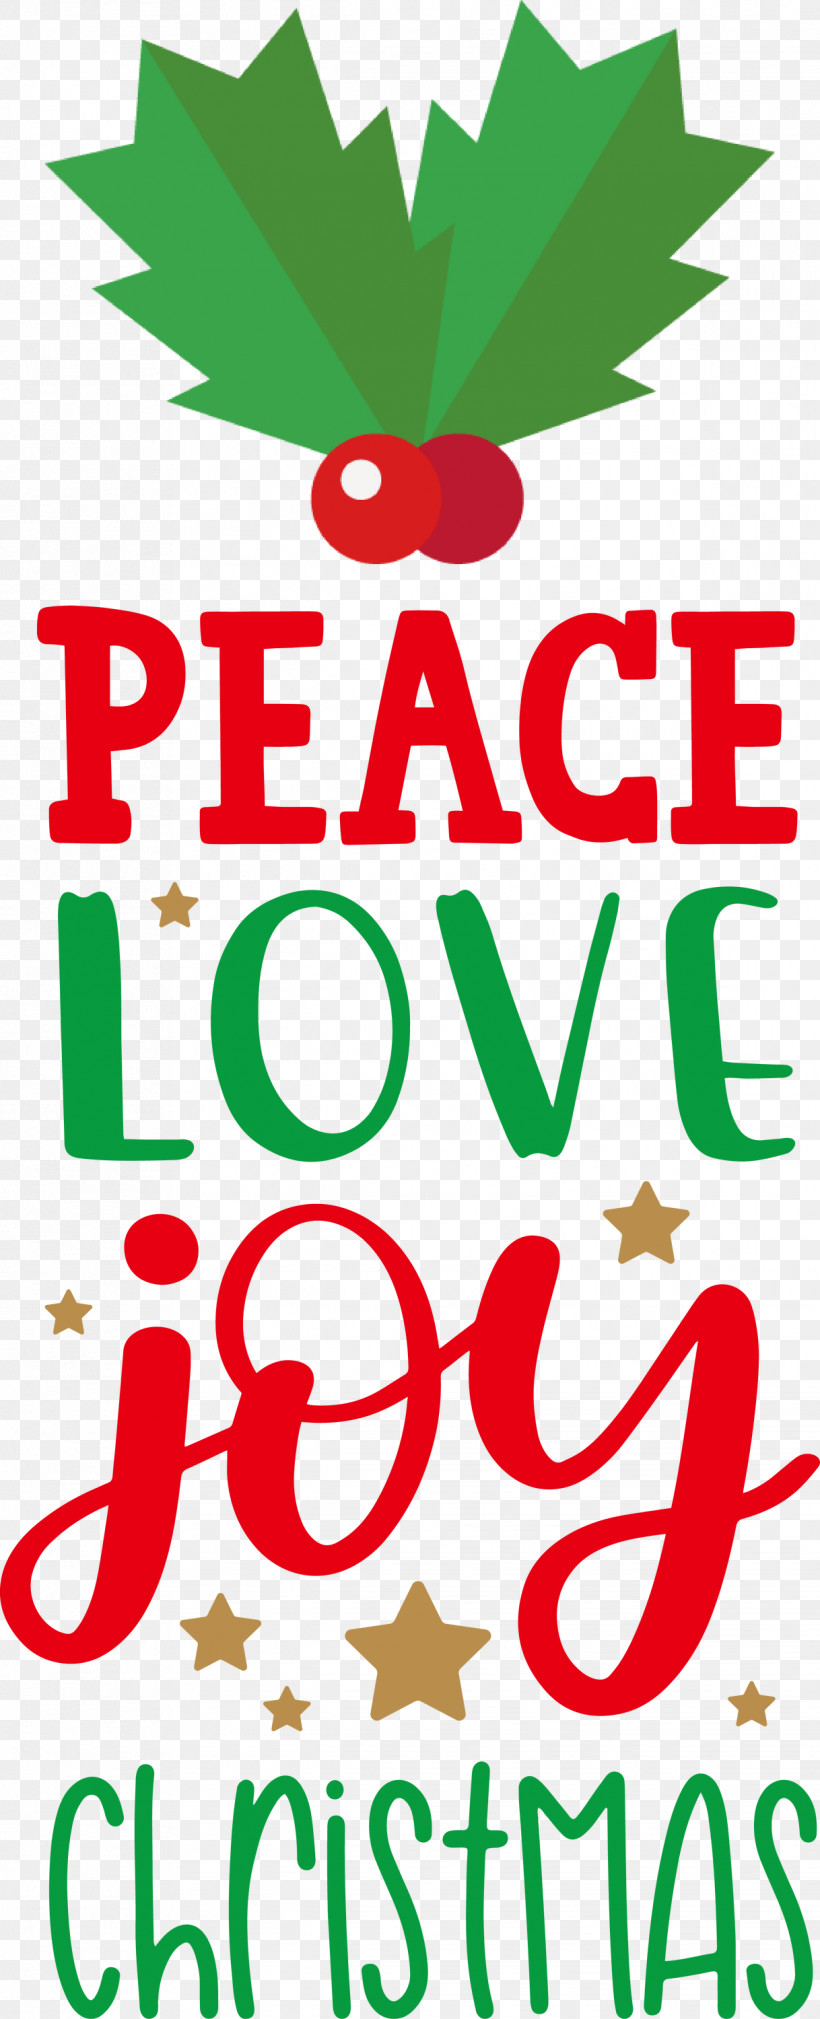 Peace Love Joy, PNG, 1218x3000px, Peace, Biology, Birthday, Christmas, Floral Design Download Free